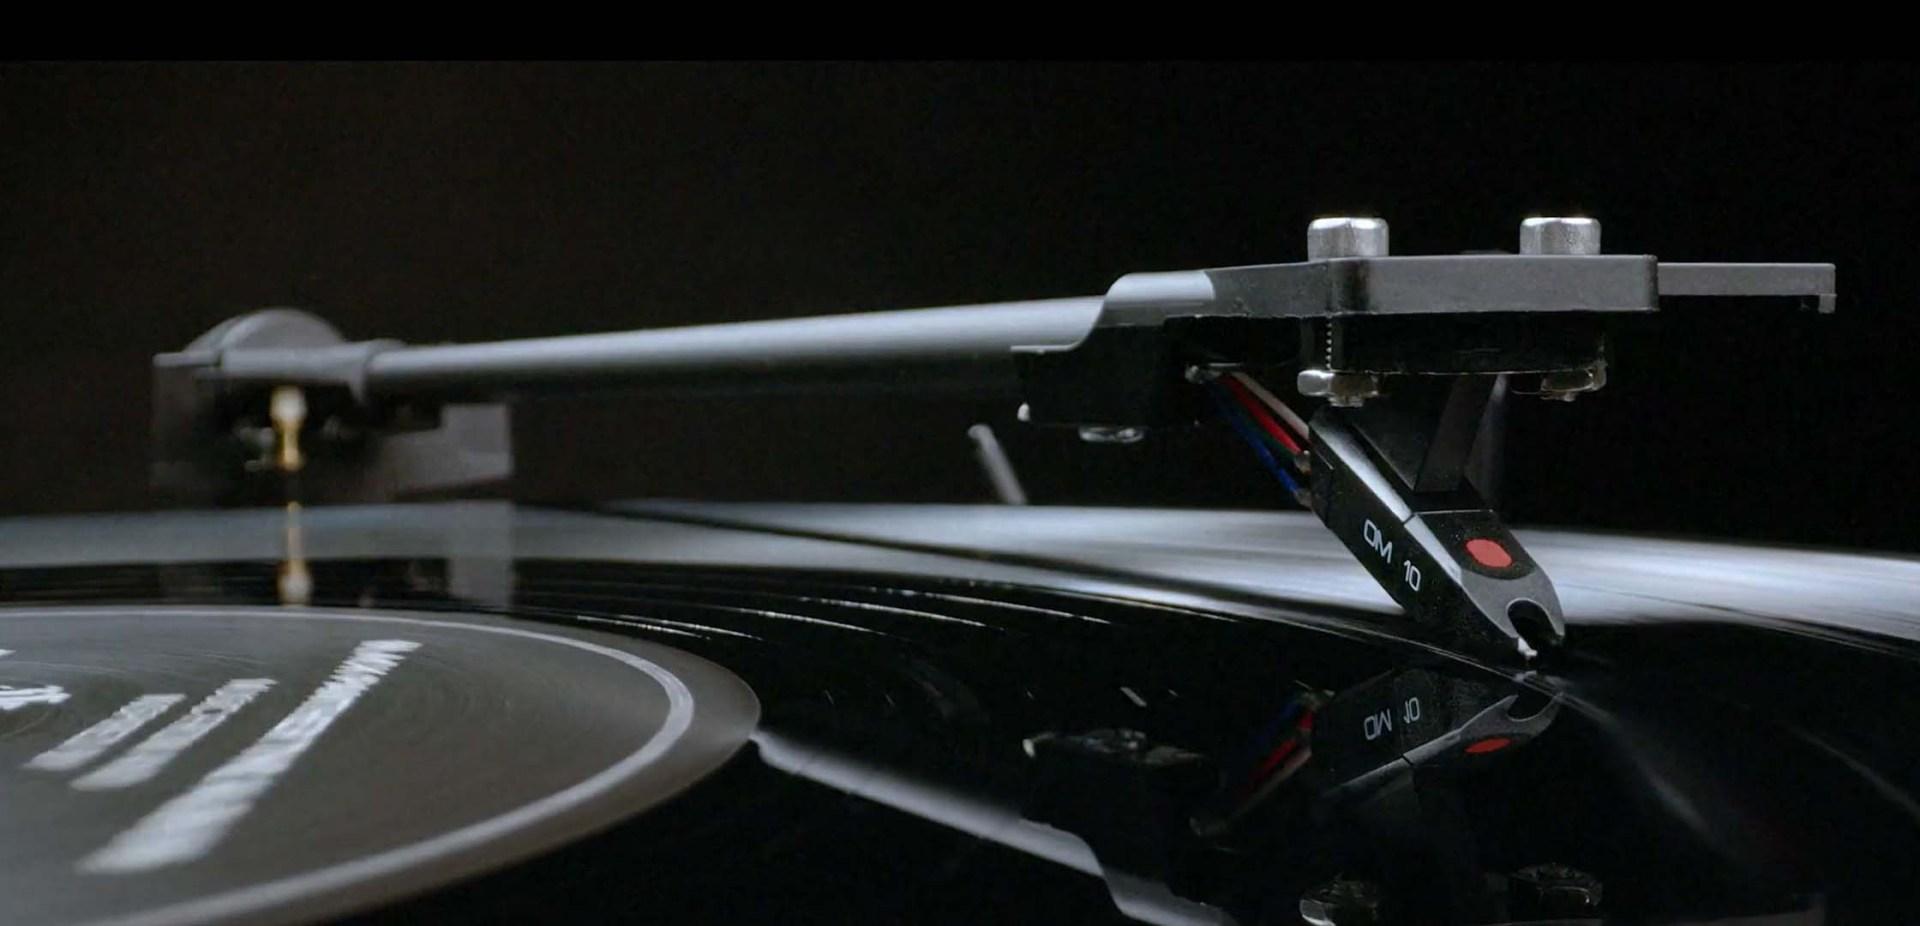 Pro-Ject's latest turntable is plug-and-play, automated, and made in Germany. e9a77fb8 ortofon pro ject